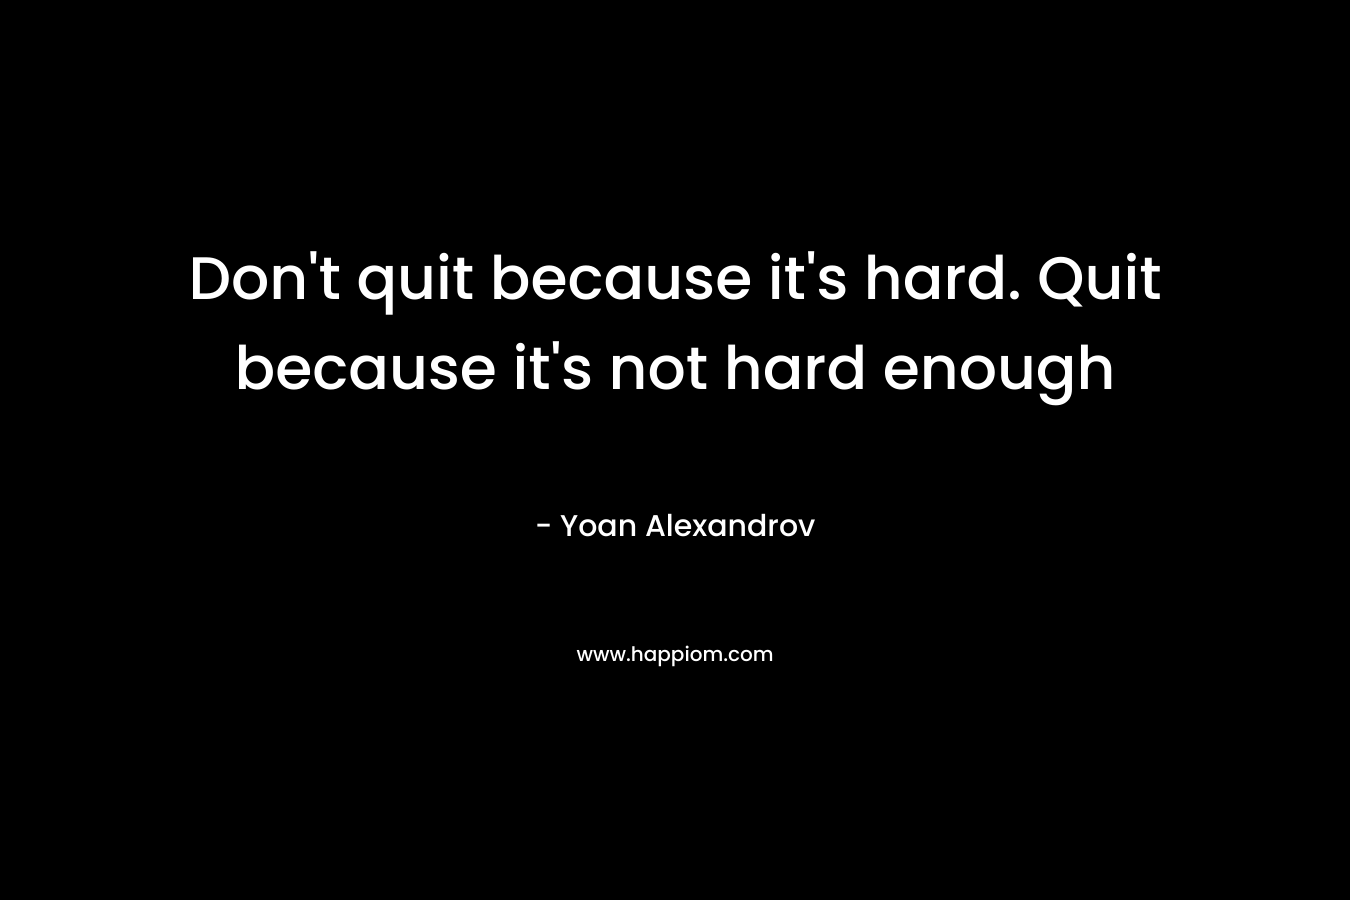 Don't quit because it's hard. Quit because it's not hard enough